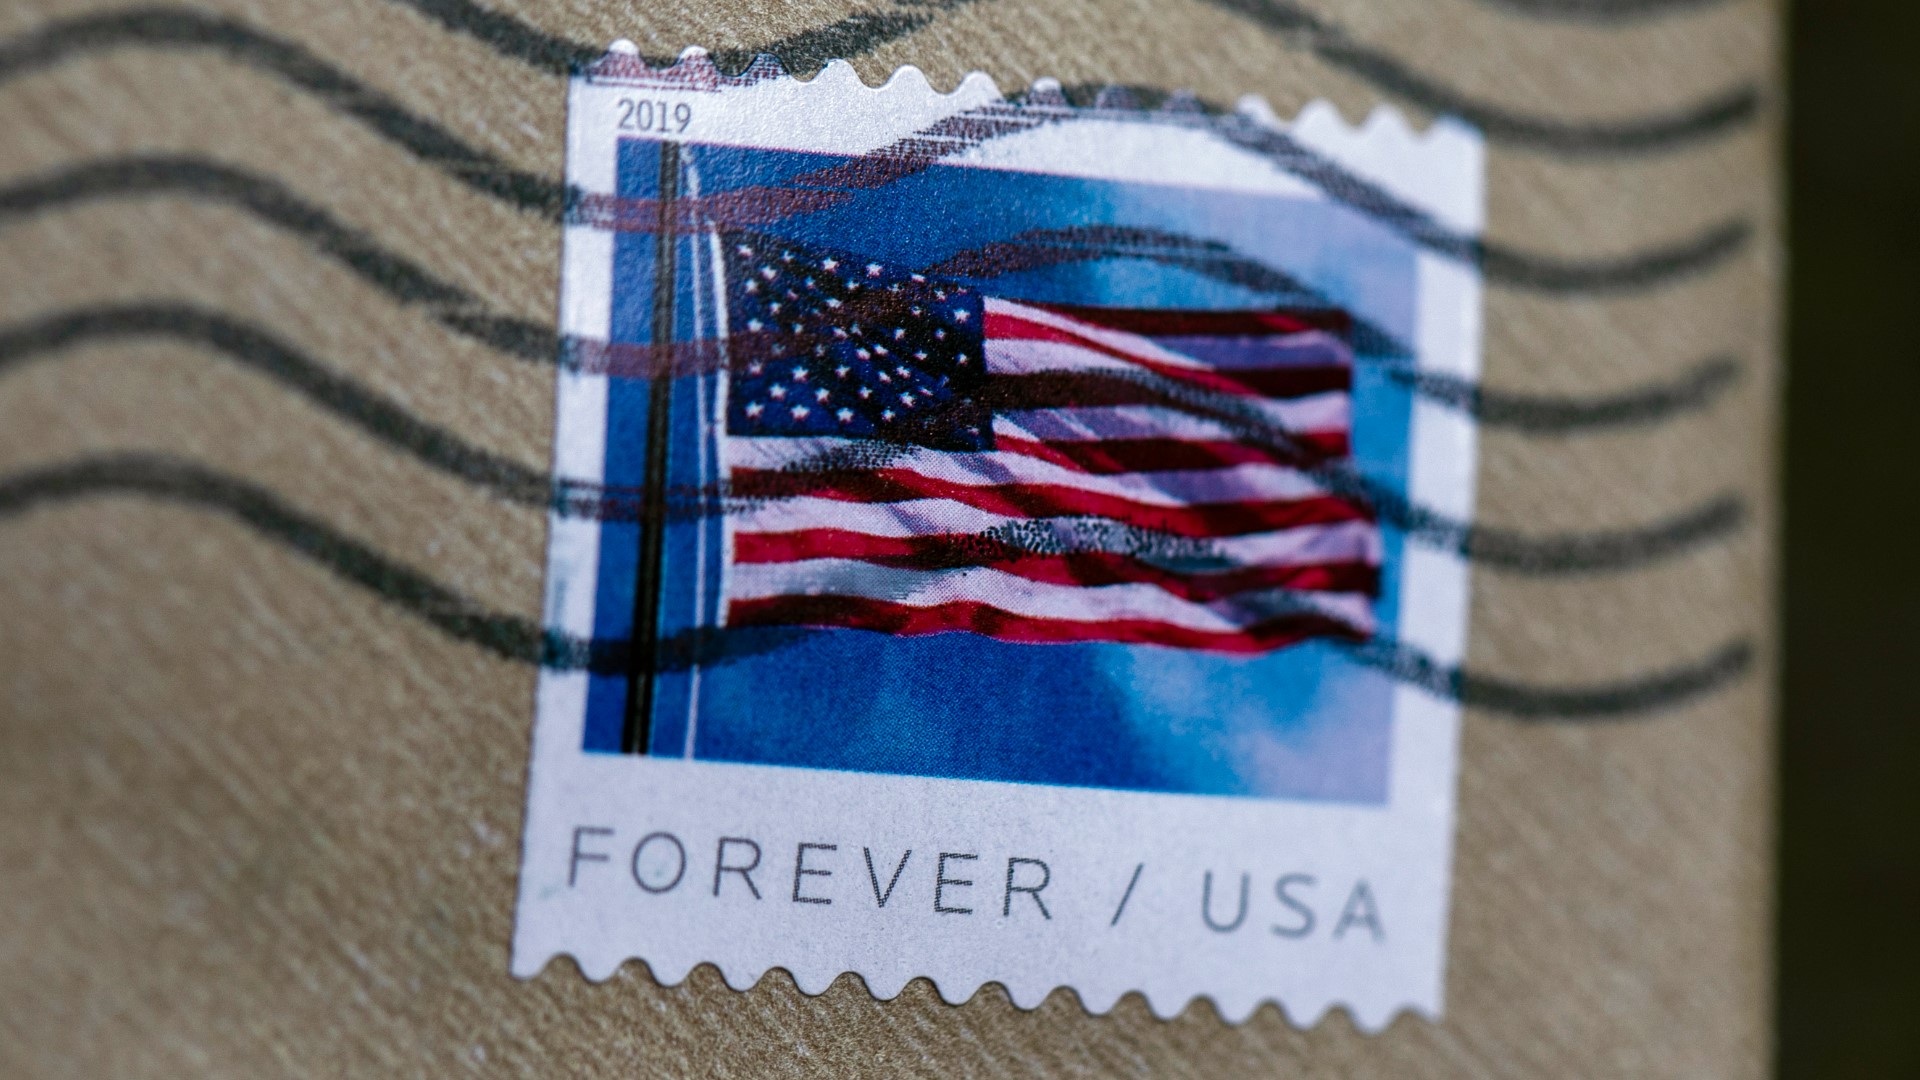 Price of a Forever stamp is going up. Here's how much they will